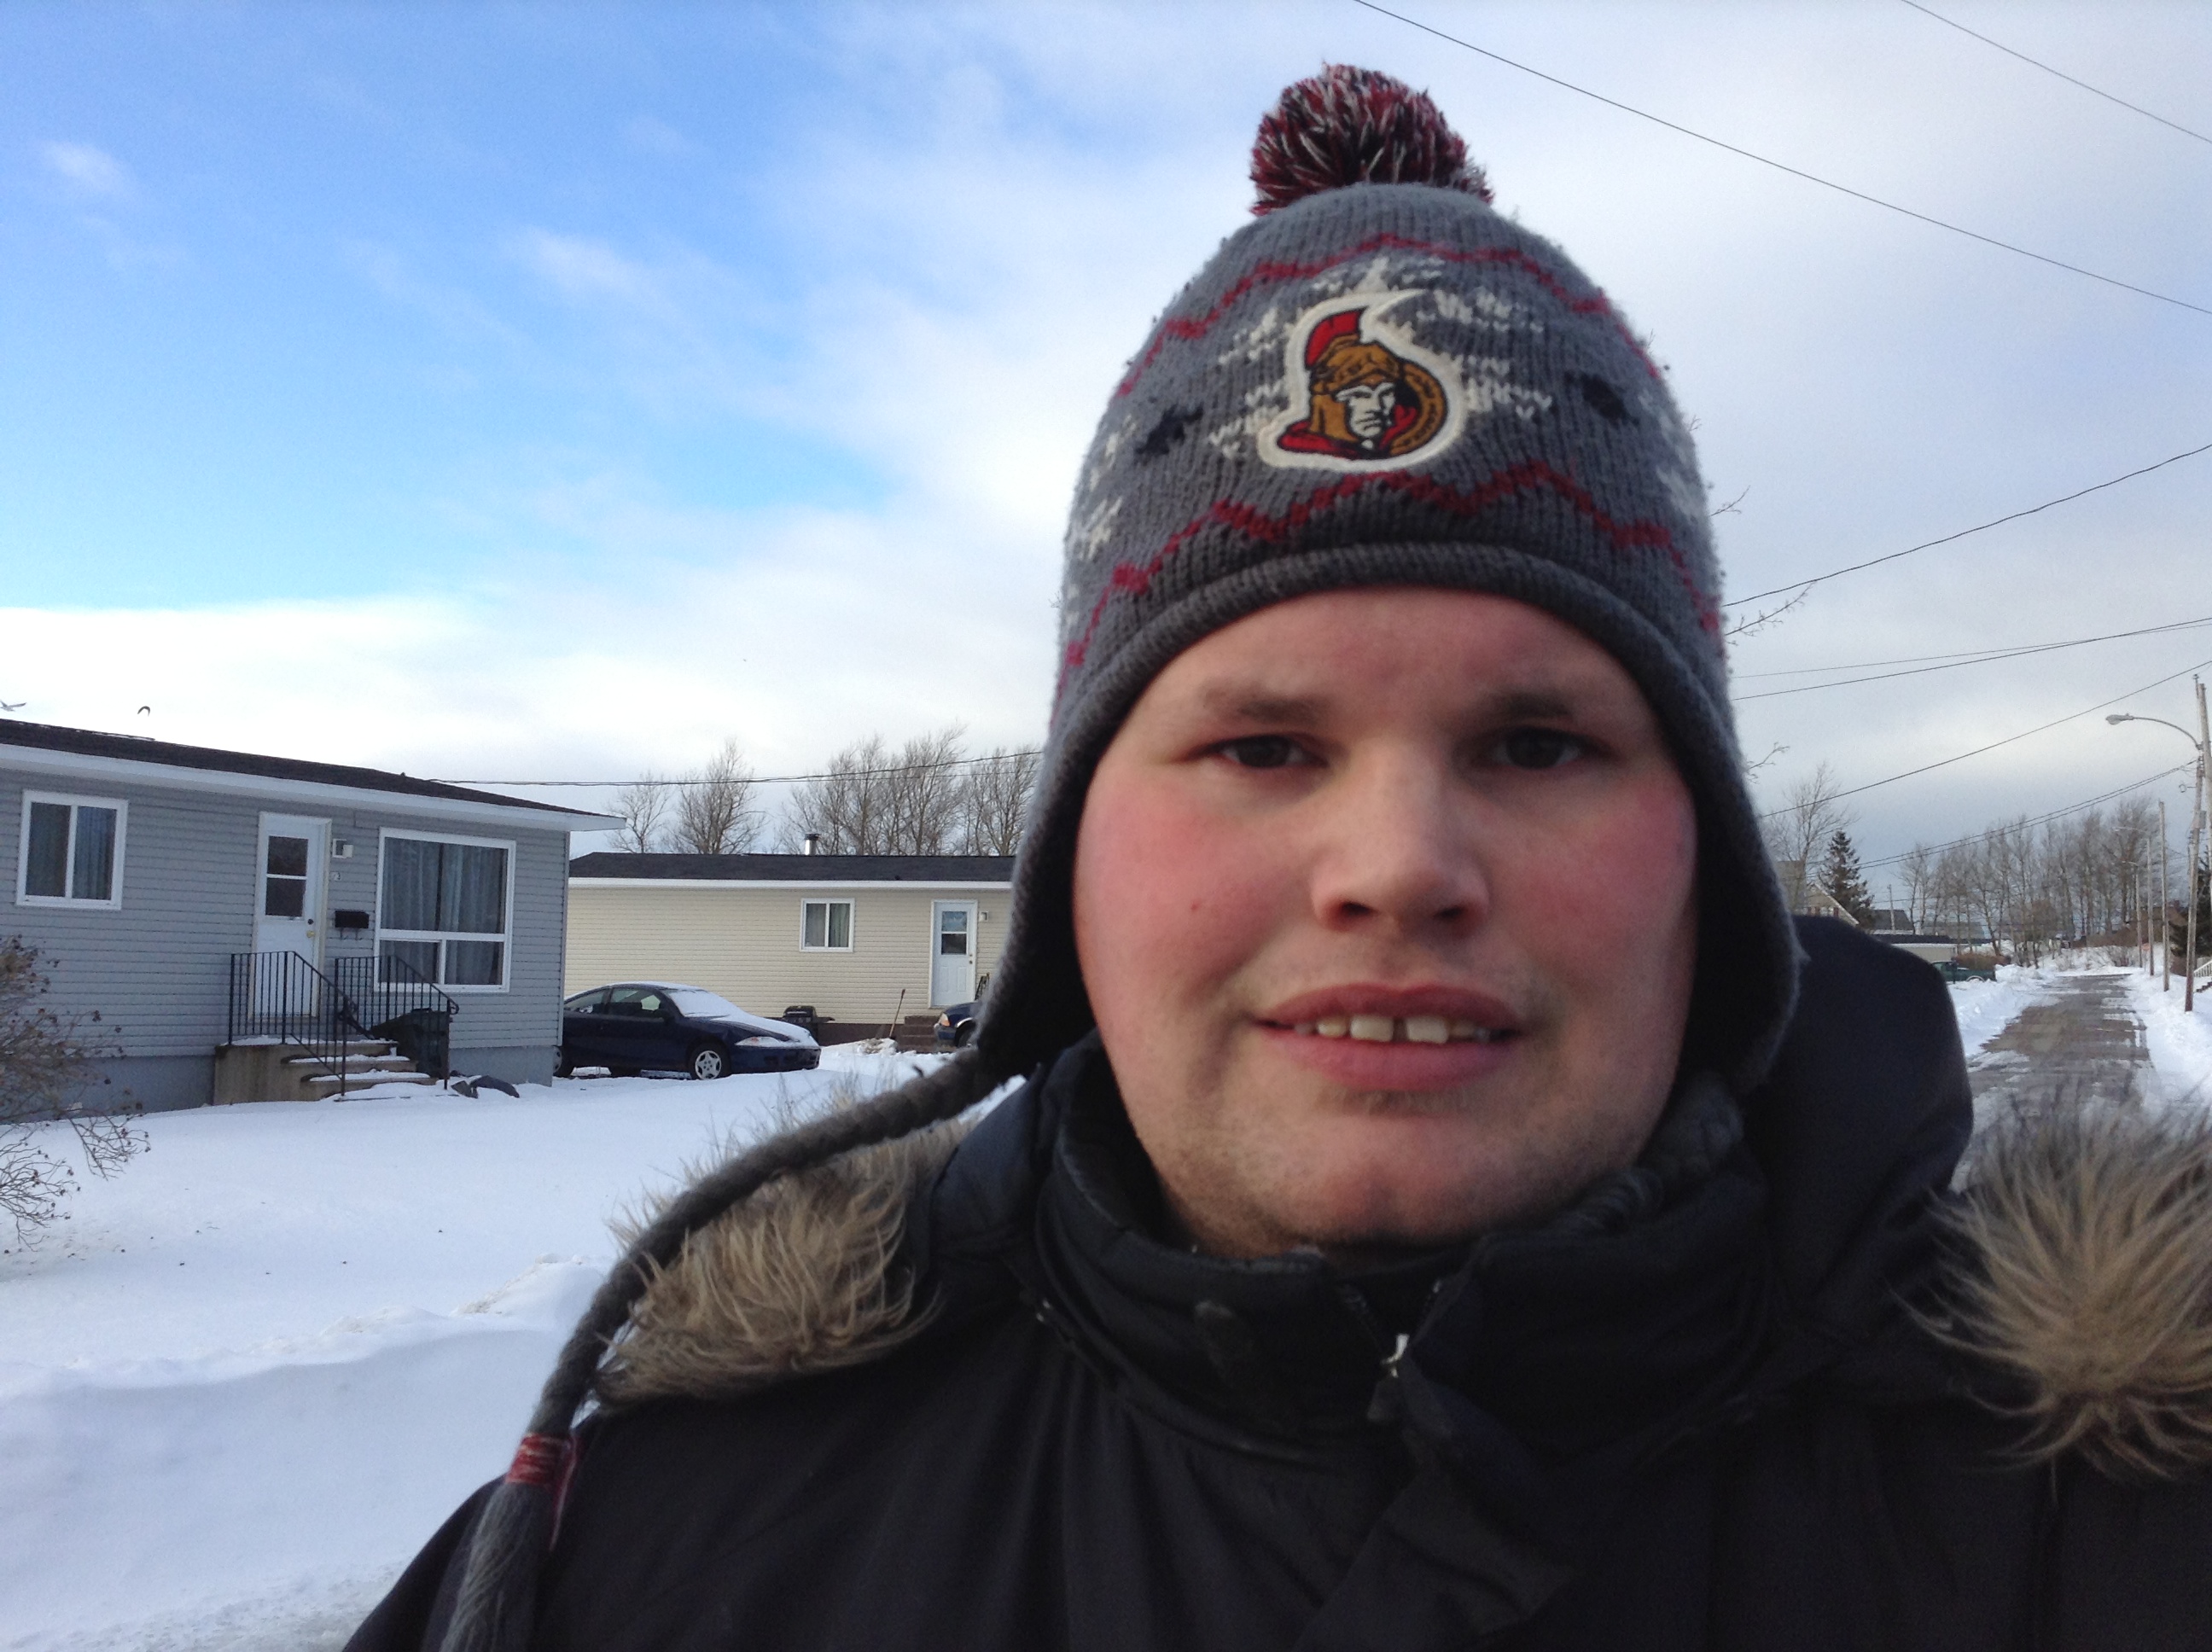 Frankie MacDonald is enjoying his walk and getting some exercise.